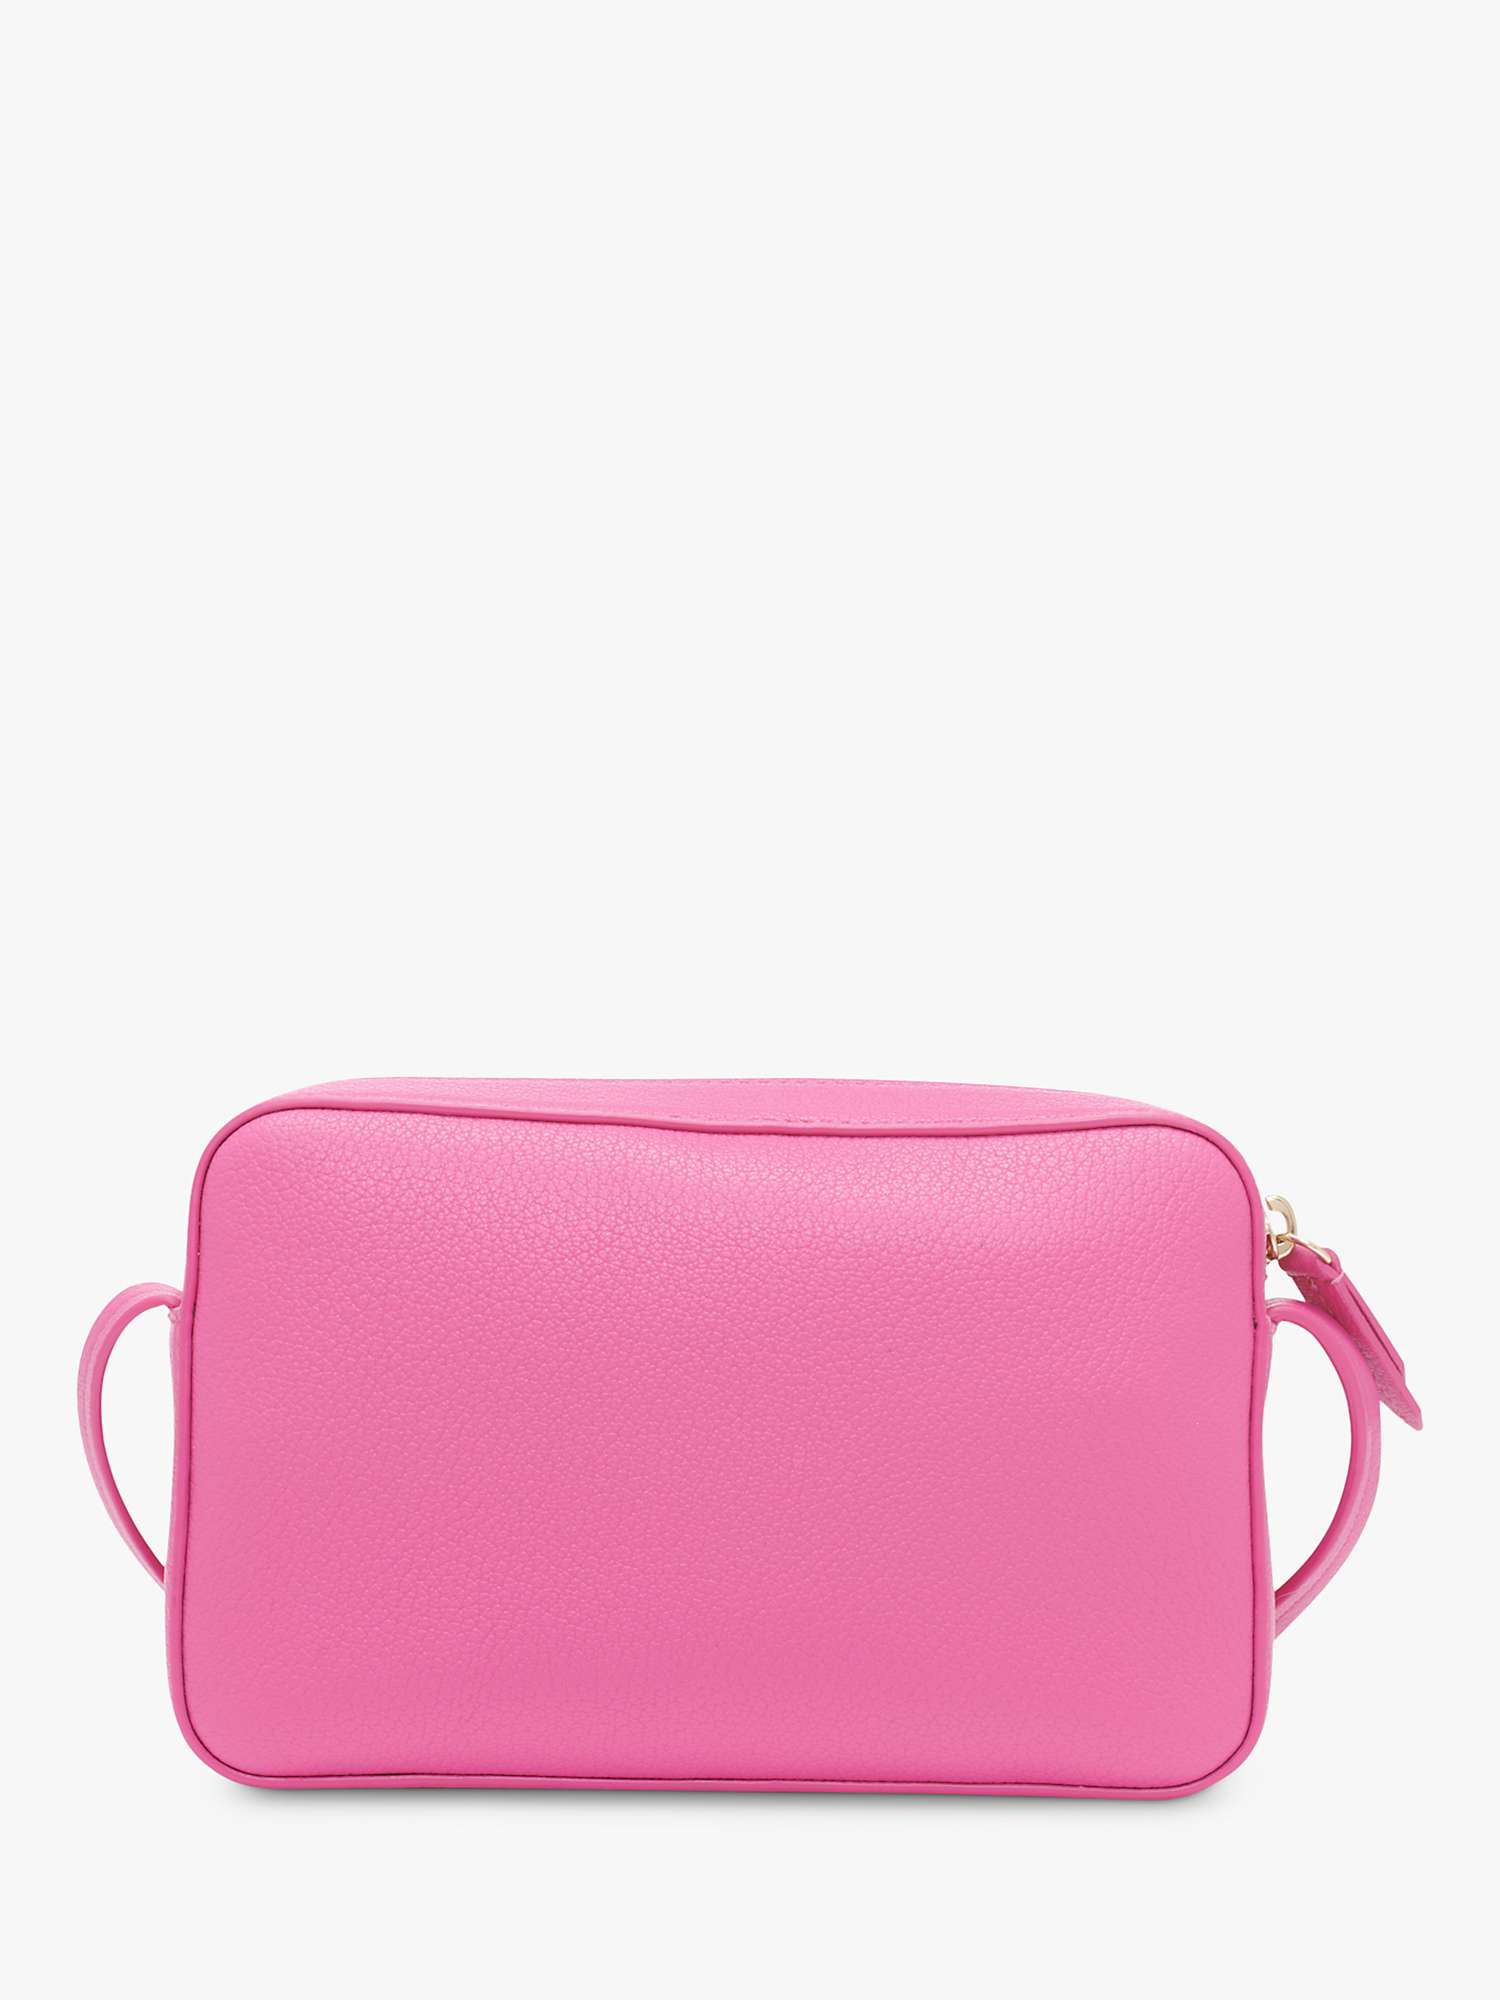 Buy DKNY 7th Avenue Leather Camera Bag Online at johnlewis.com